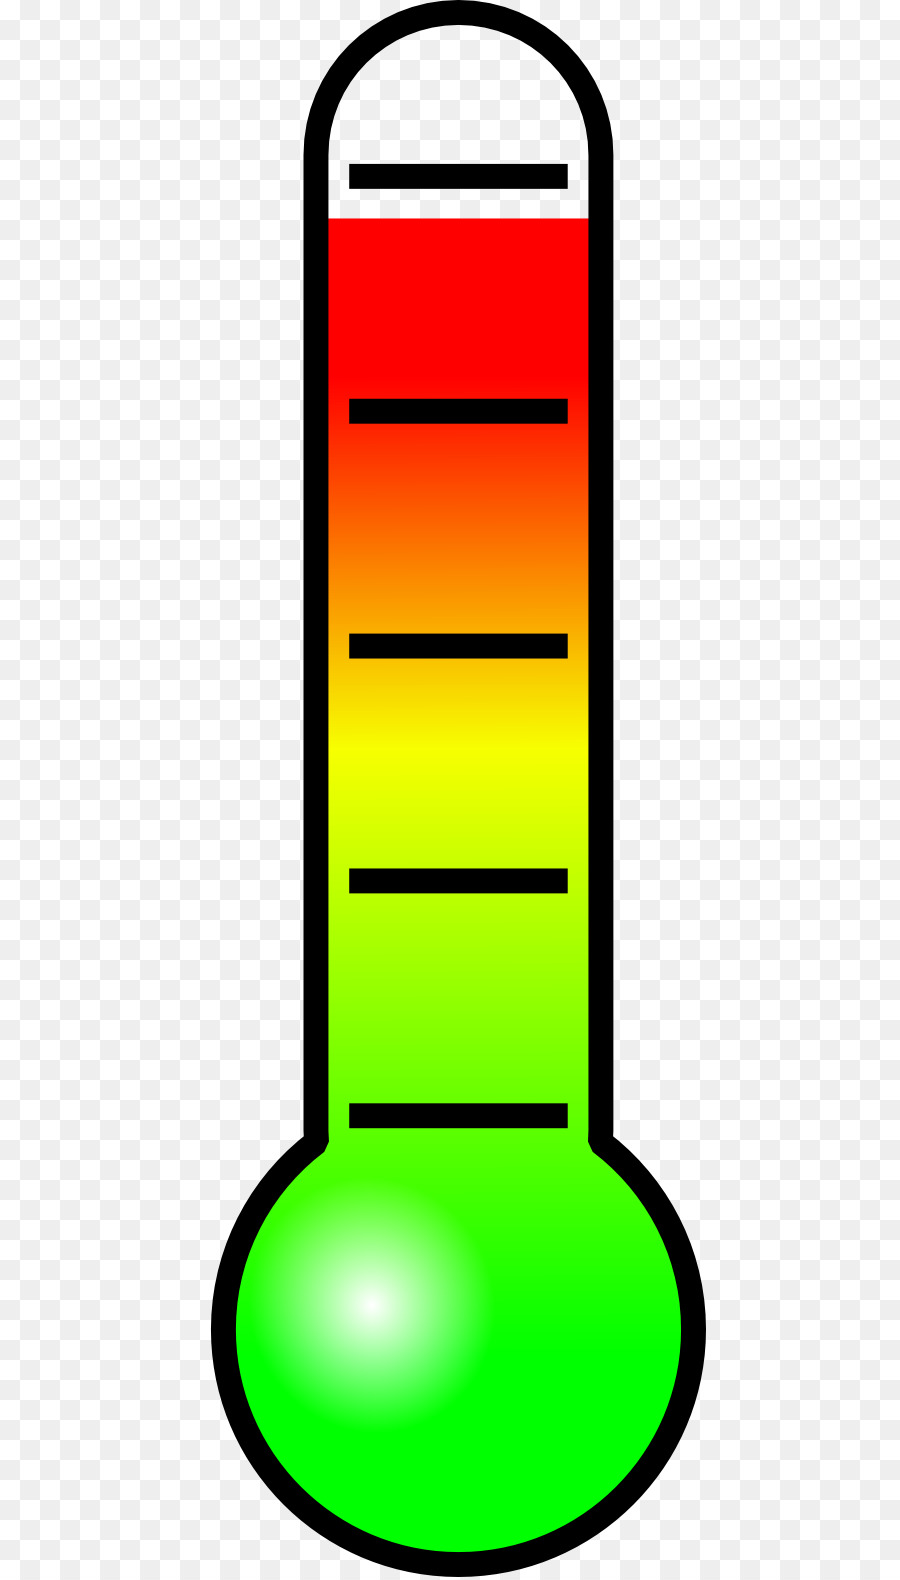 clipart thermometer